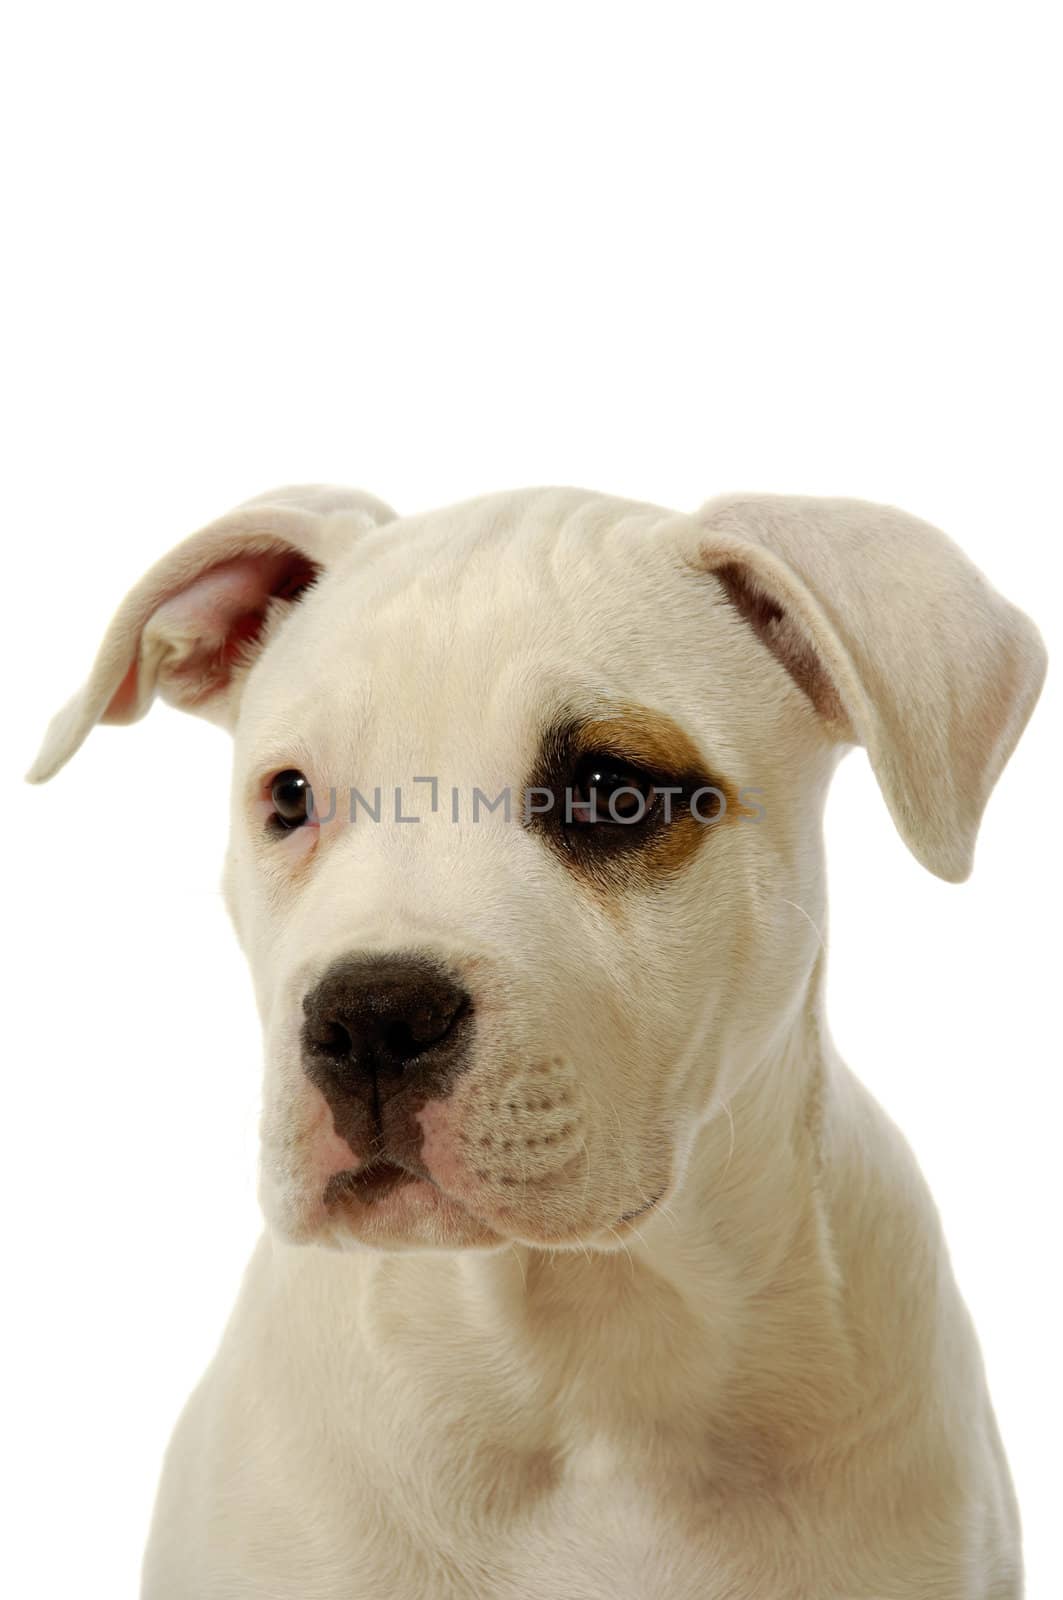 Sweet puppy on a clean white background